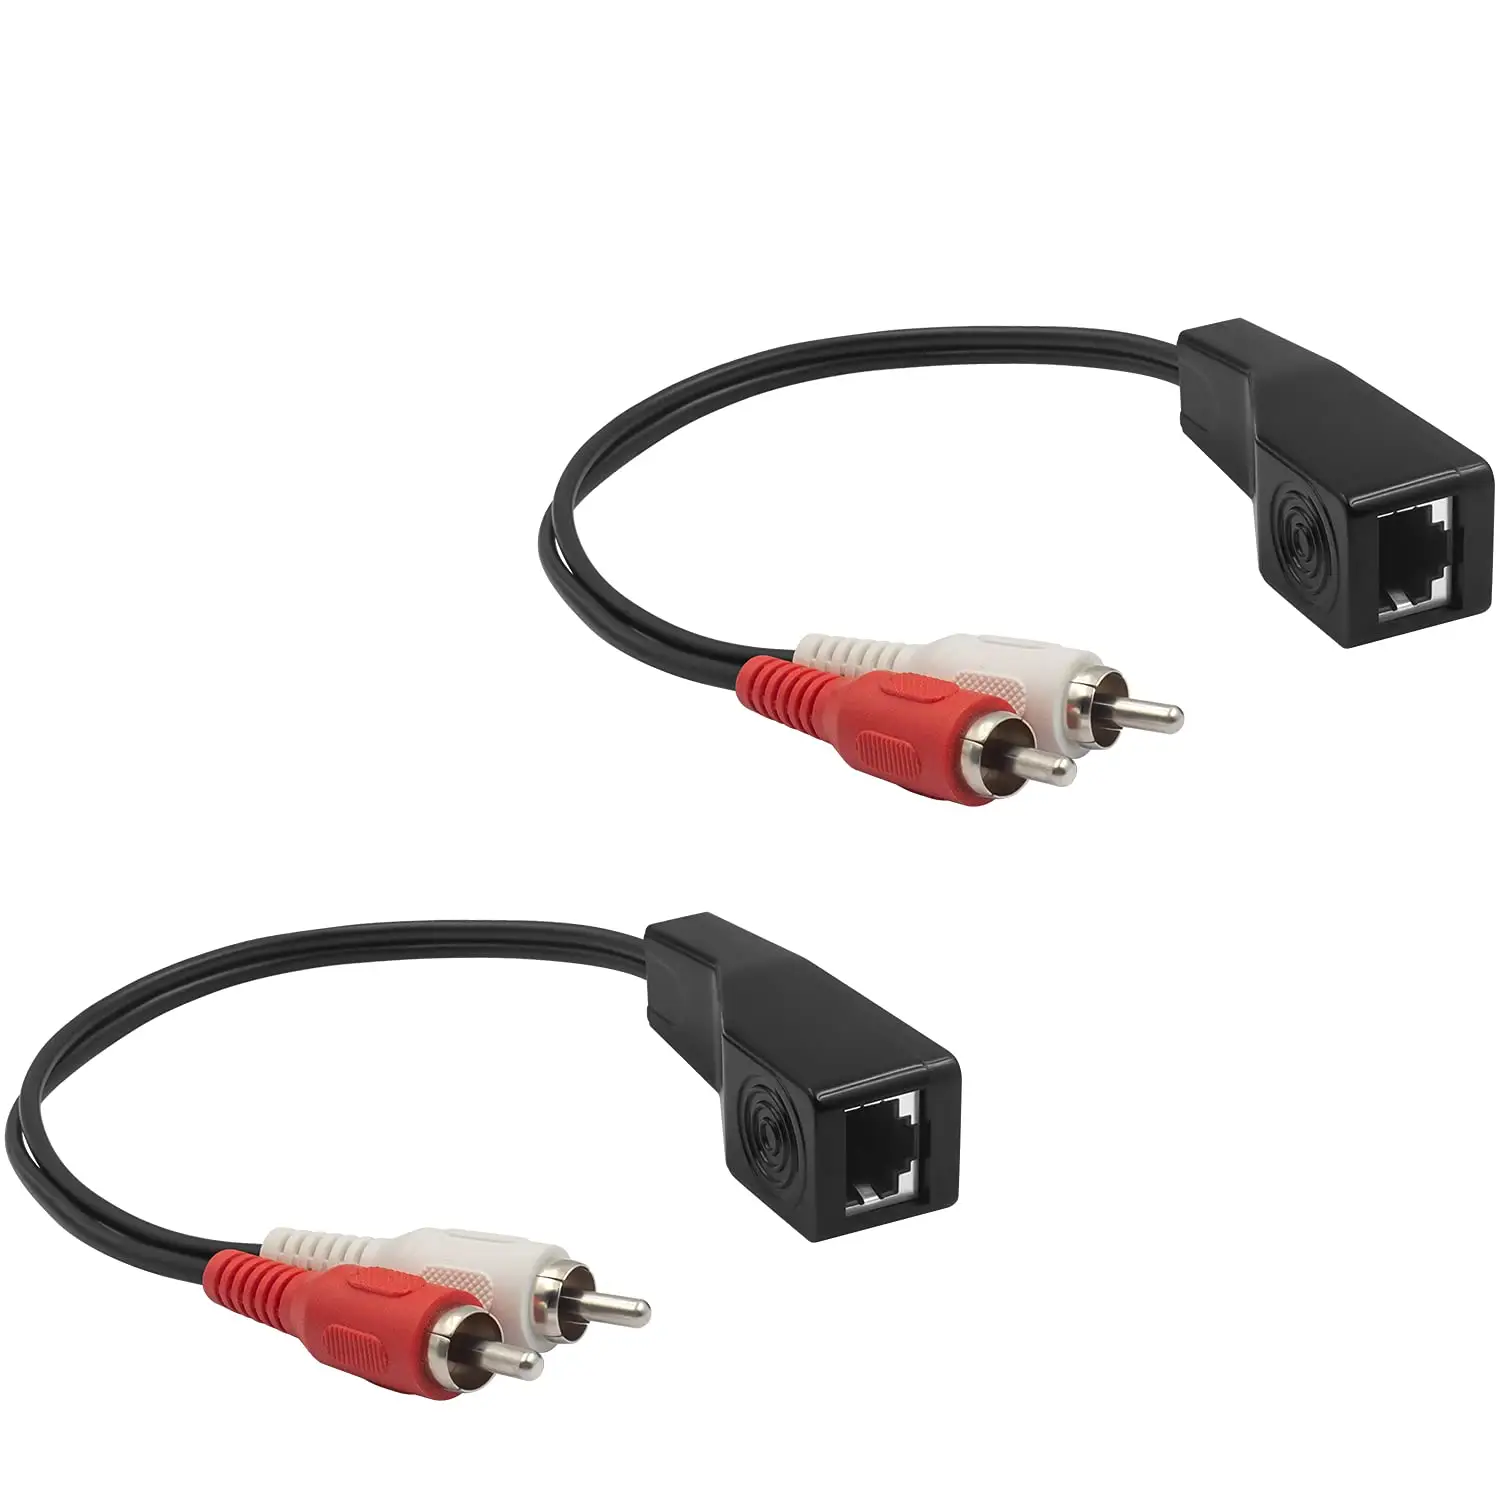 Eonvic RJ45 Male to RJ45 Male Gigabit Ethernet Cable Networks Cat 5e Shielded Cables for Industrial Camera